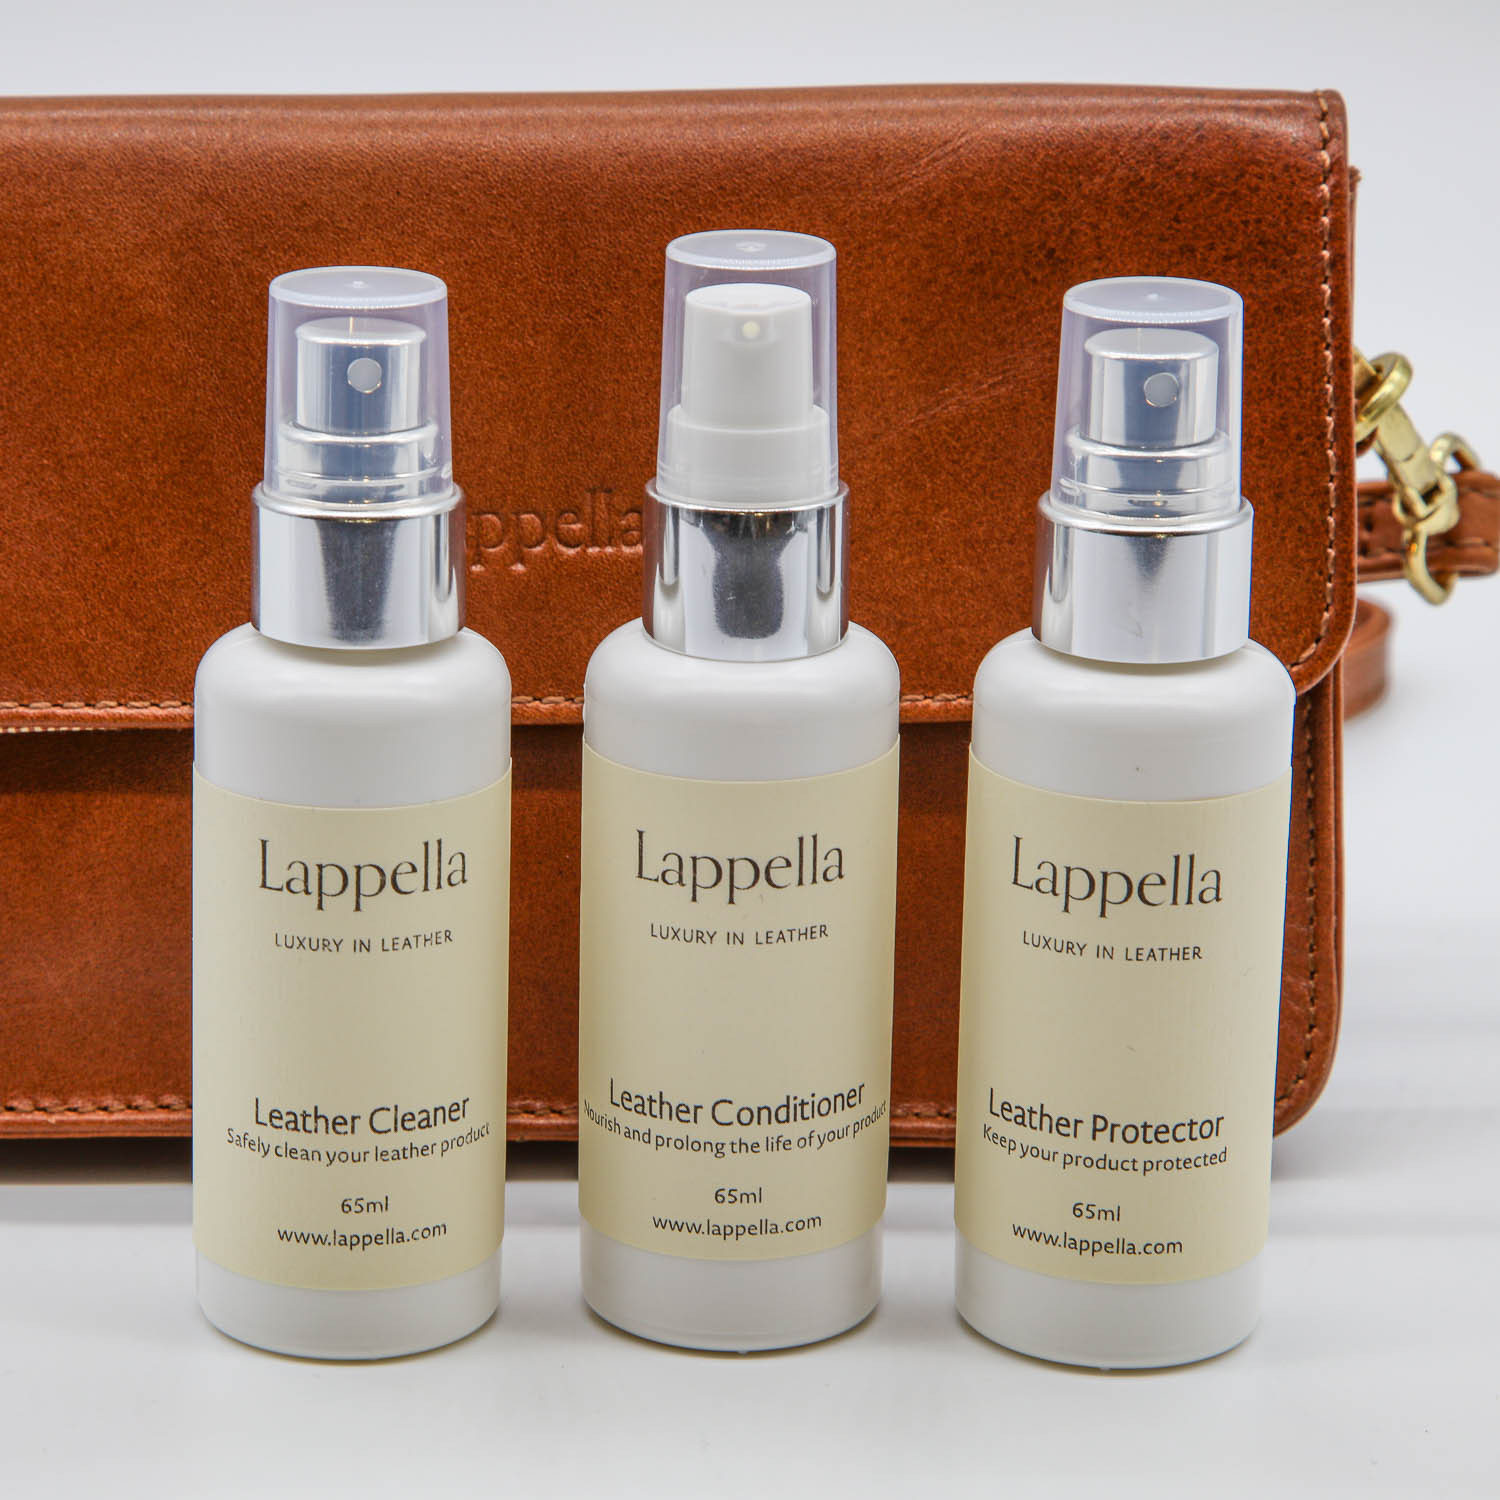 Lappella leather cleaner, conditioner and protector